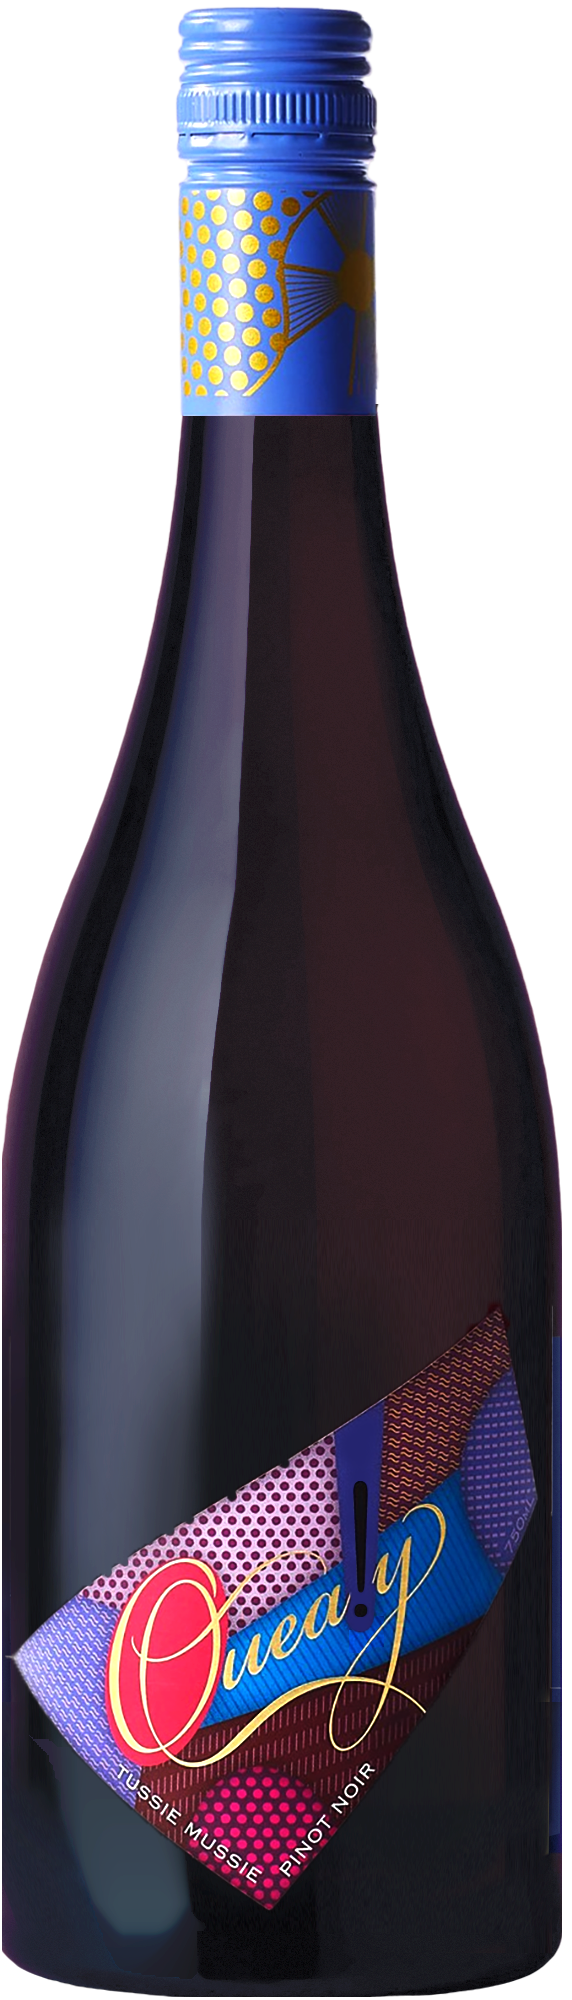 Quealy Tussie Mussie Pinot Noir 2021